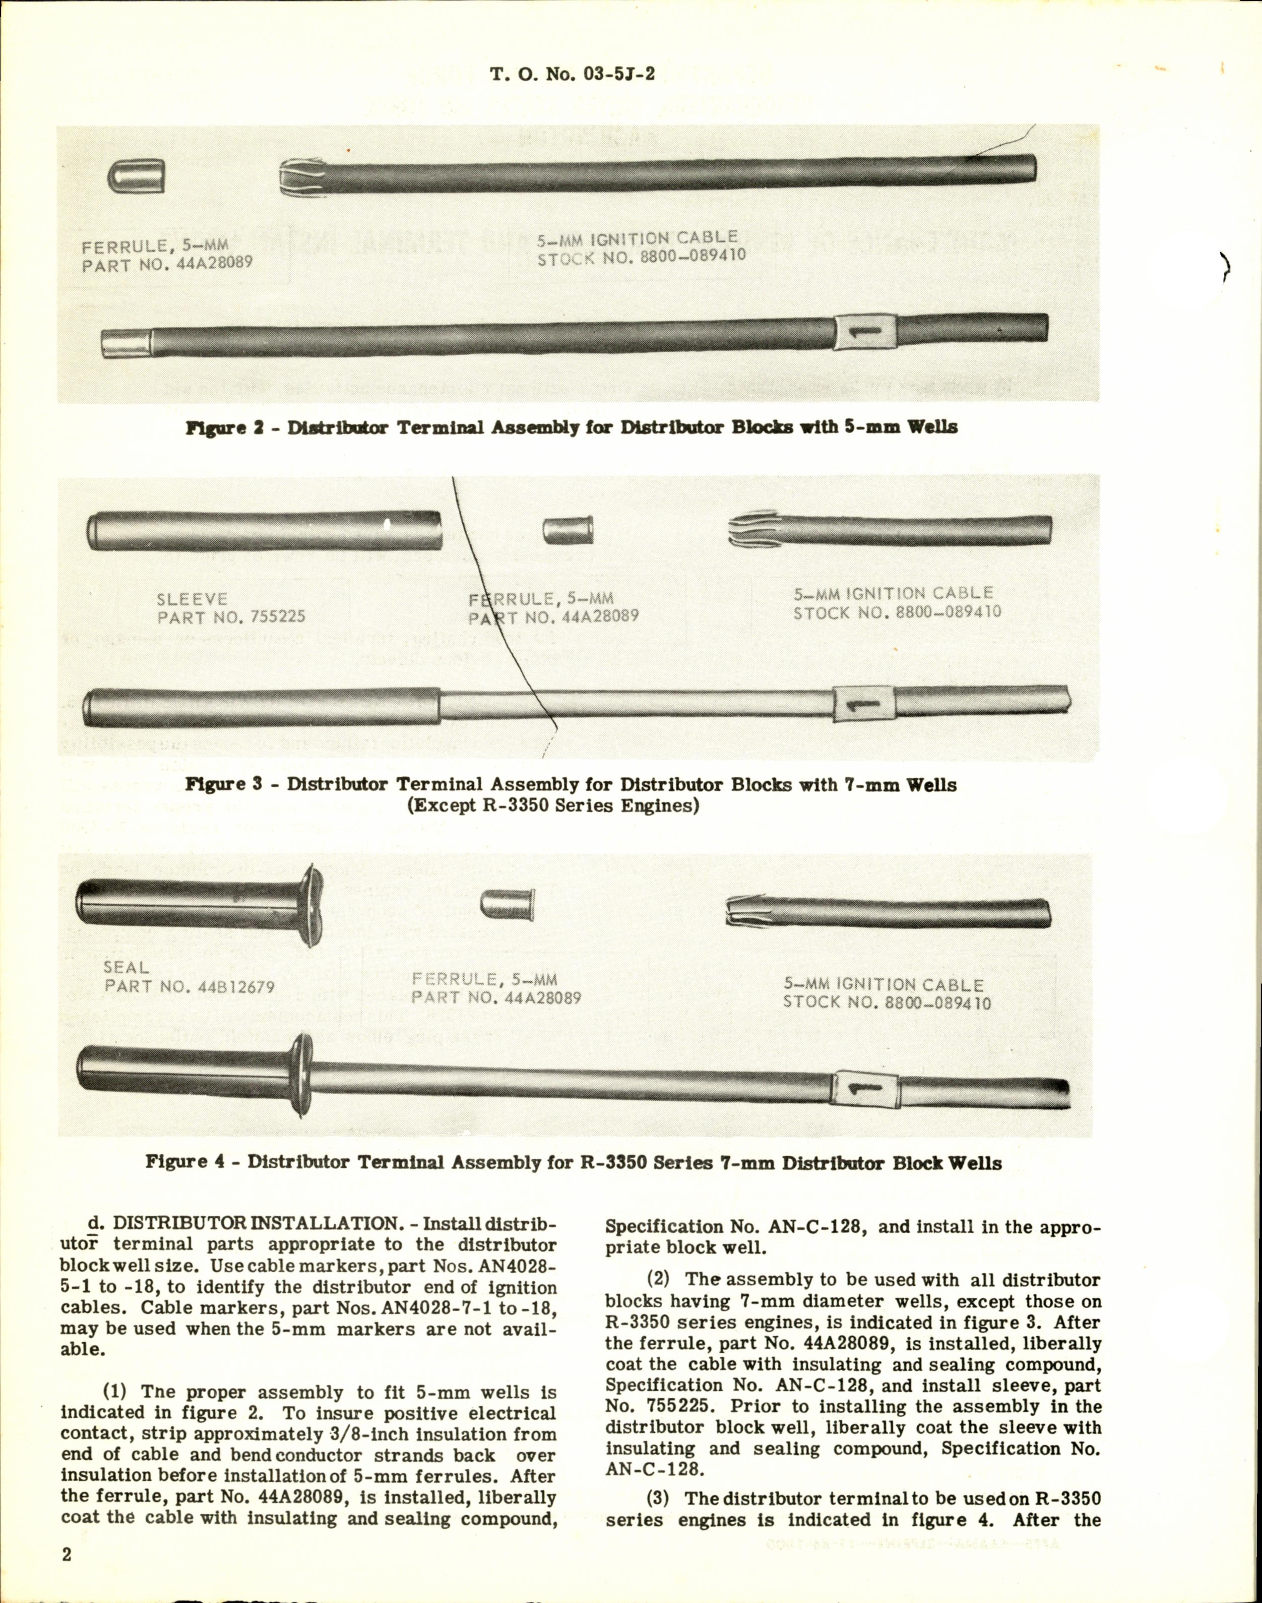 Sample page 2 from AirCorps Library document: Maintenance of Ignition Harnesses & Terminal Installations